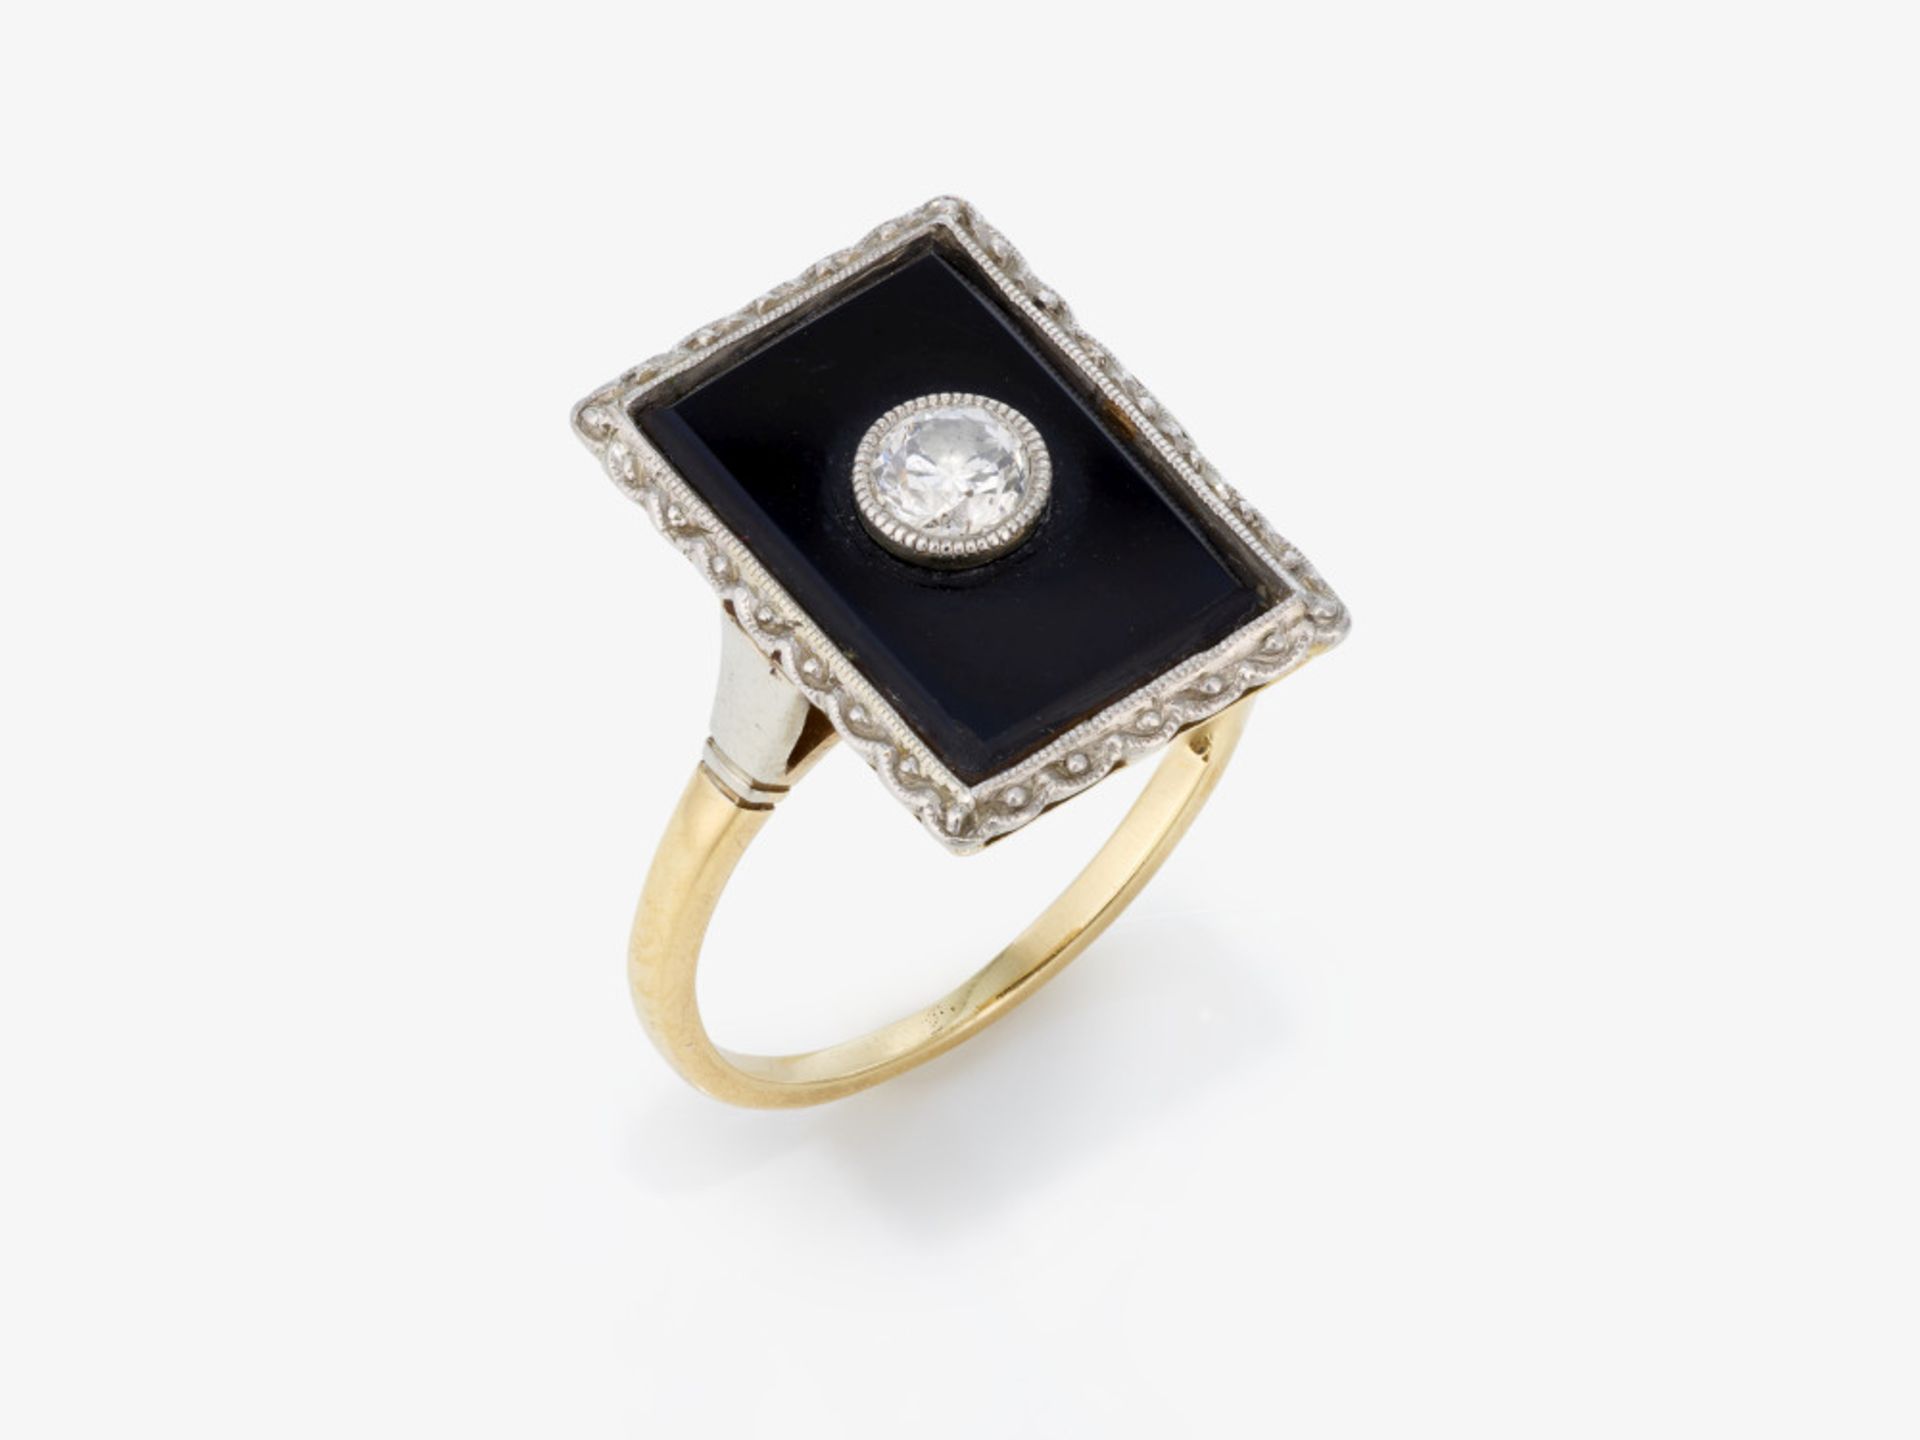 An Art Deco ring with a brilliant-cut diamond and onyx - Probably Germany, circa 1930